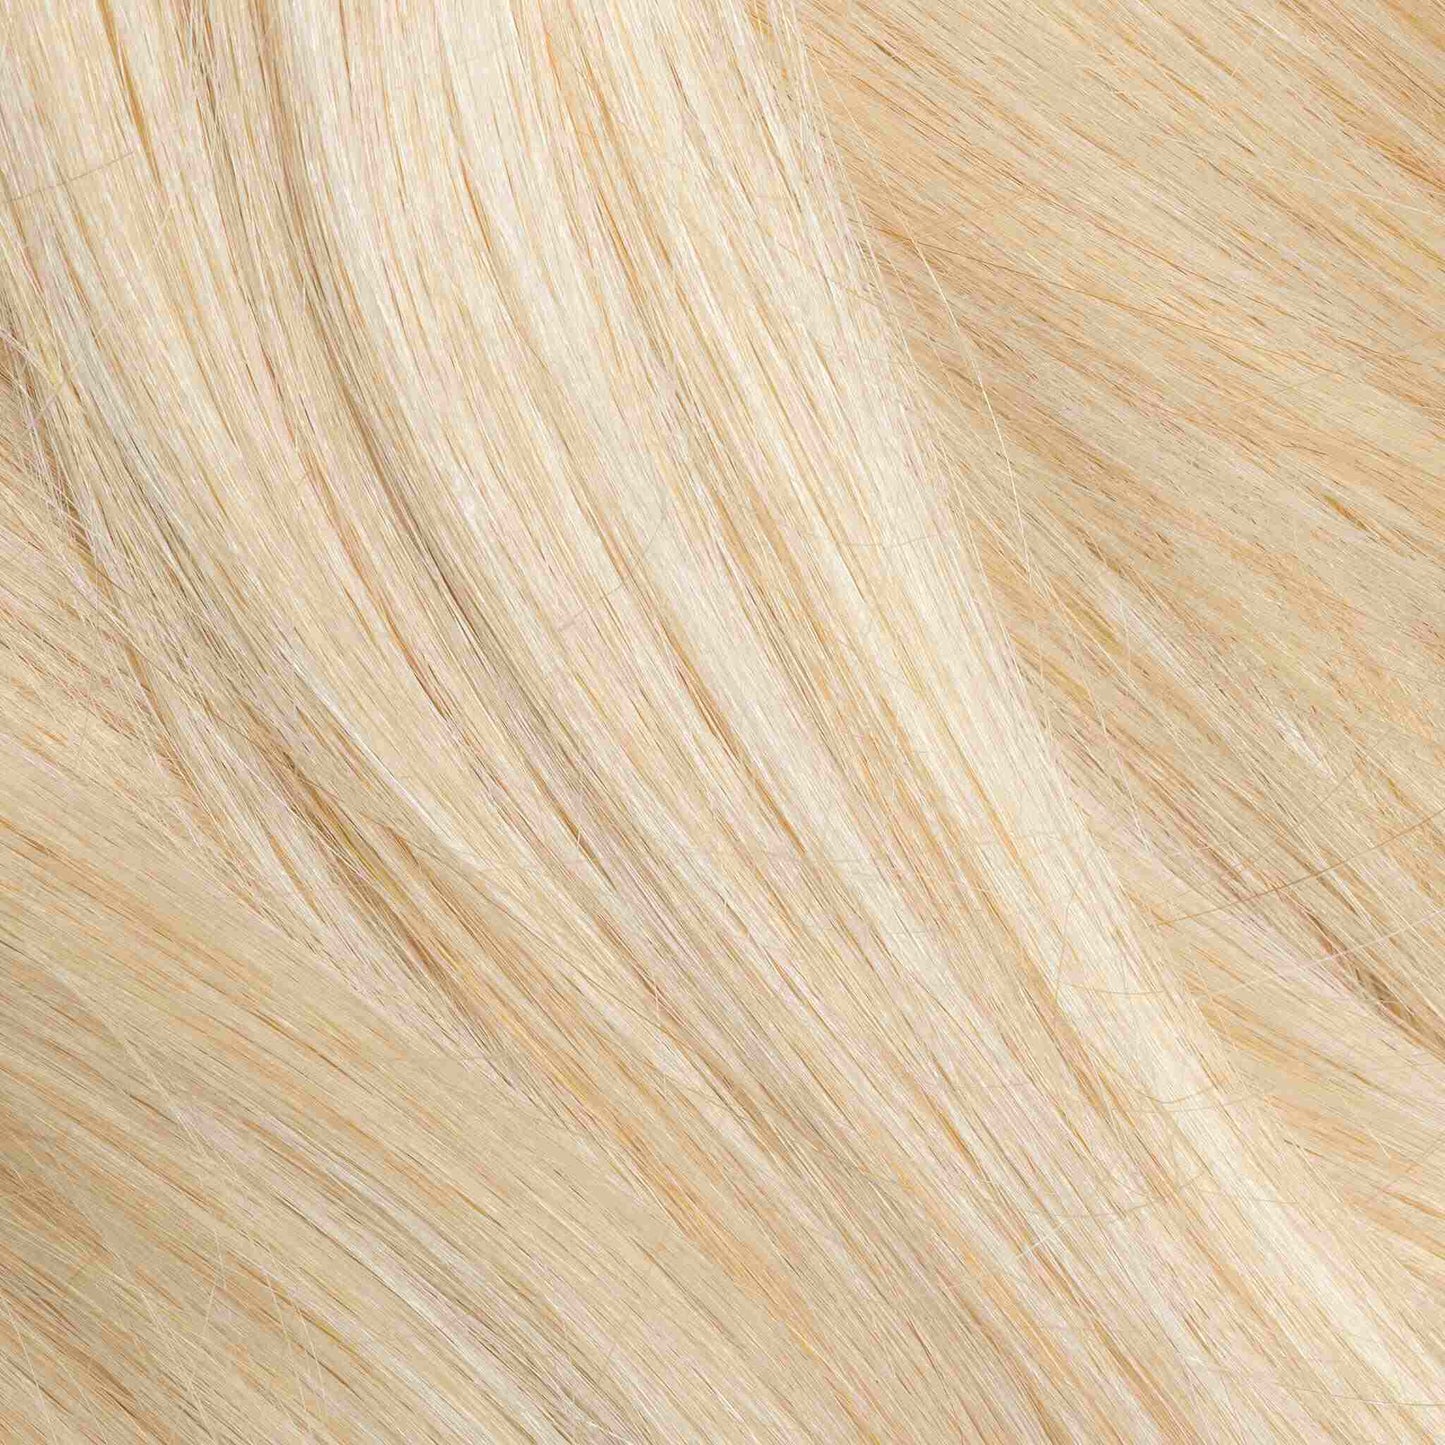 I-Tip 16" 25g Professional Hair Extensions - Ash Blonde #60